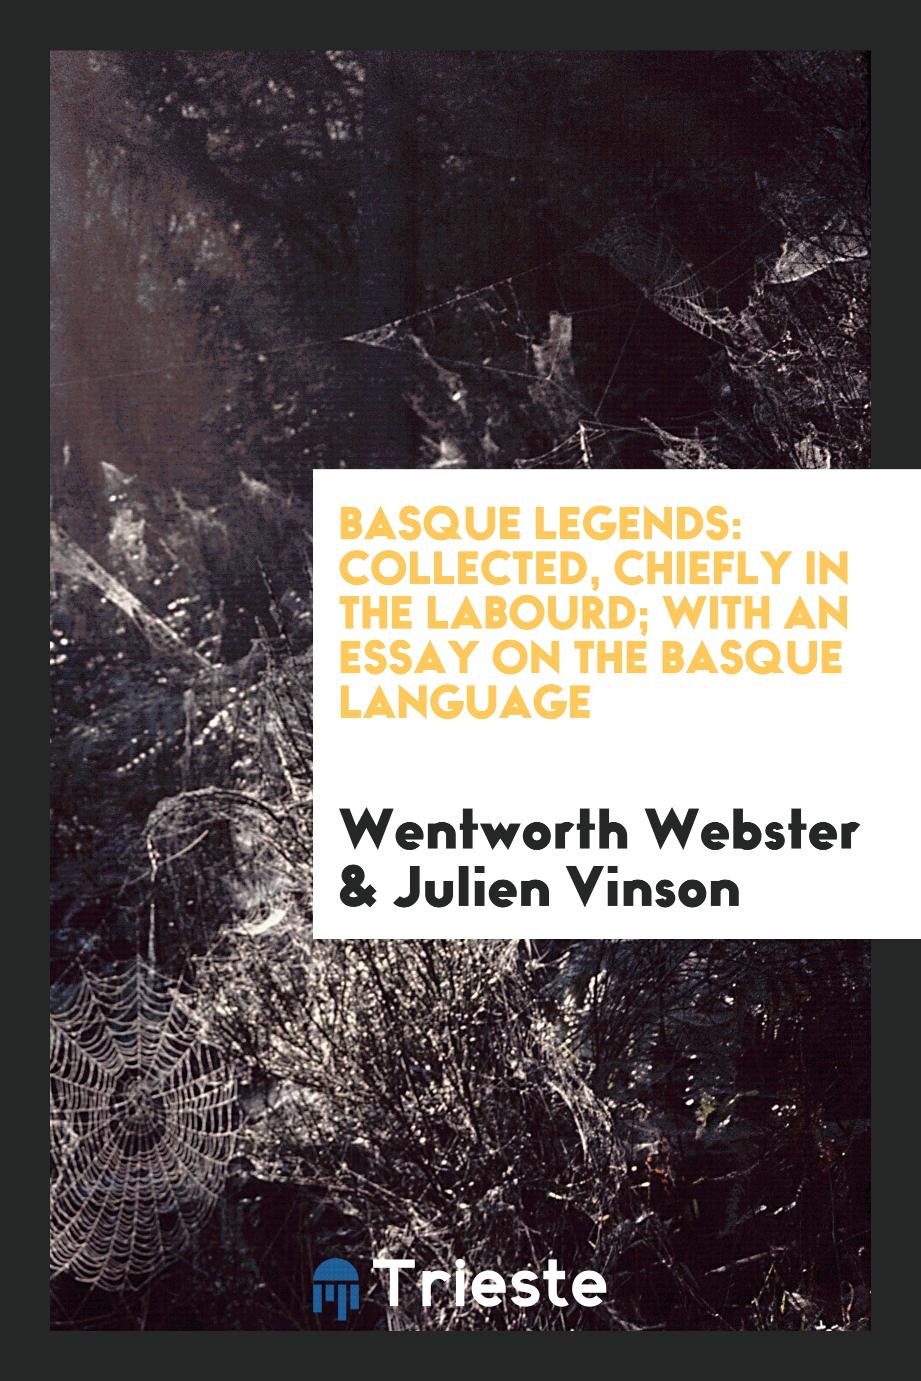 Basque Legends: Collected, Chiefly in the Labourd; With an Essay on the Basque Language